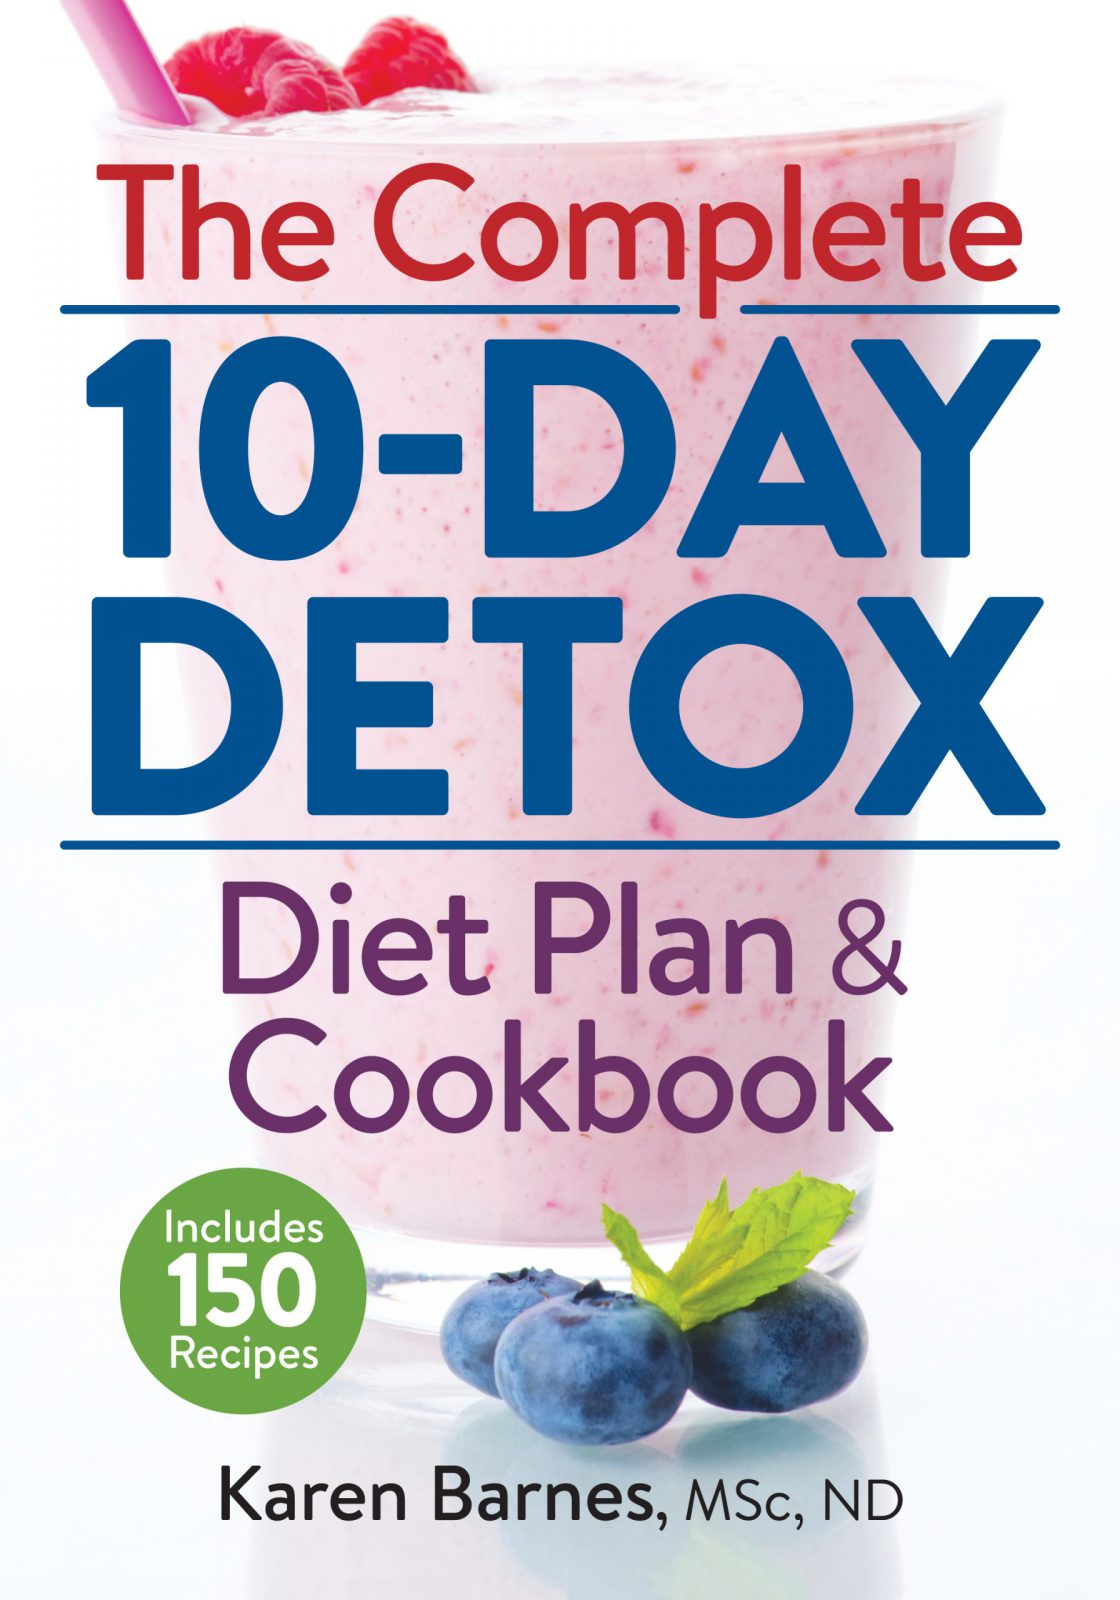 The Complete 10-Day Detox Diet Plan and Cookbook